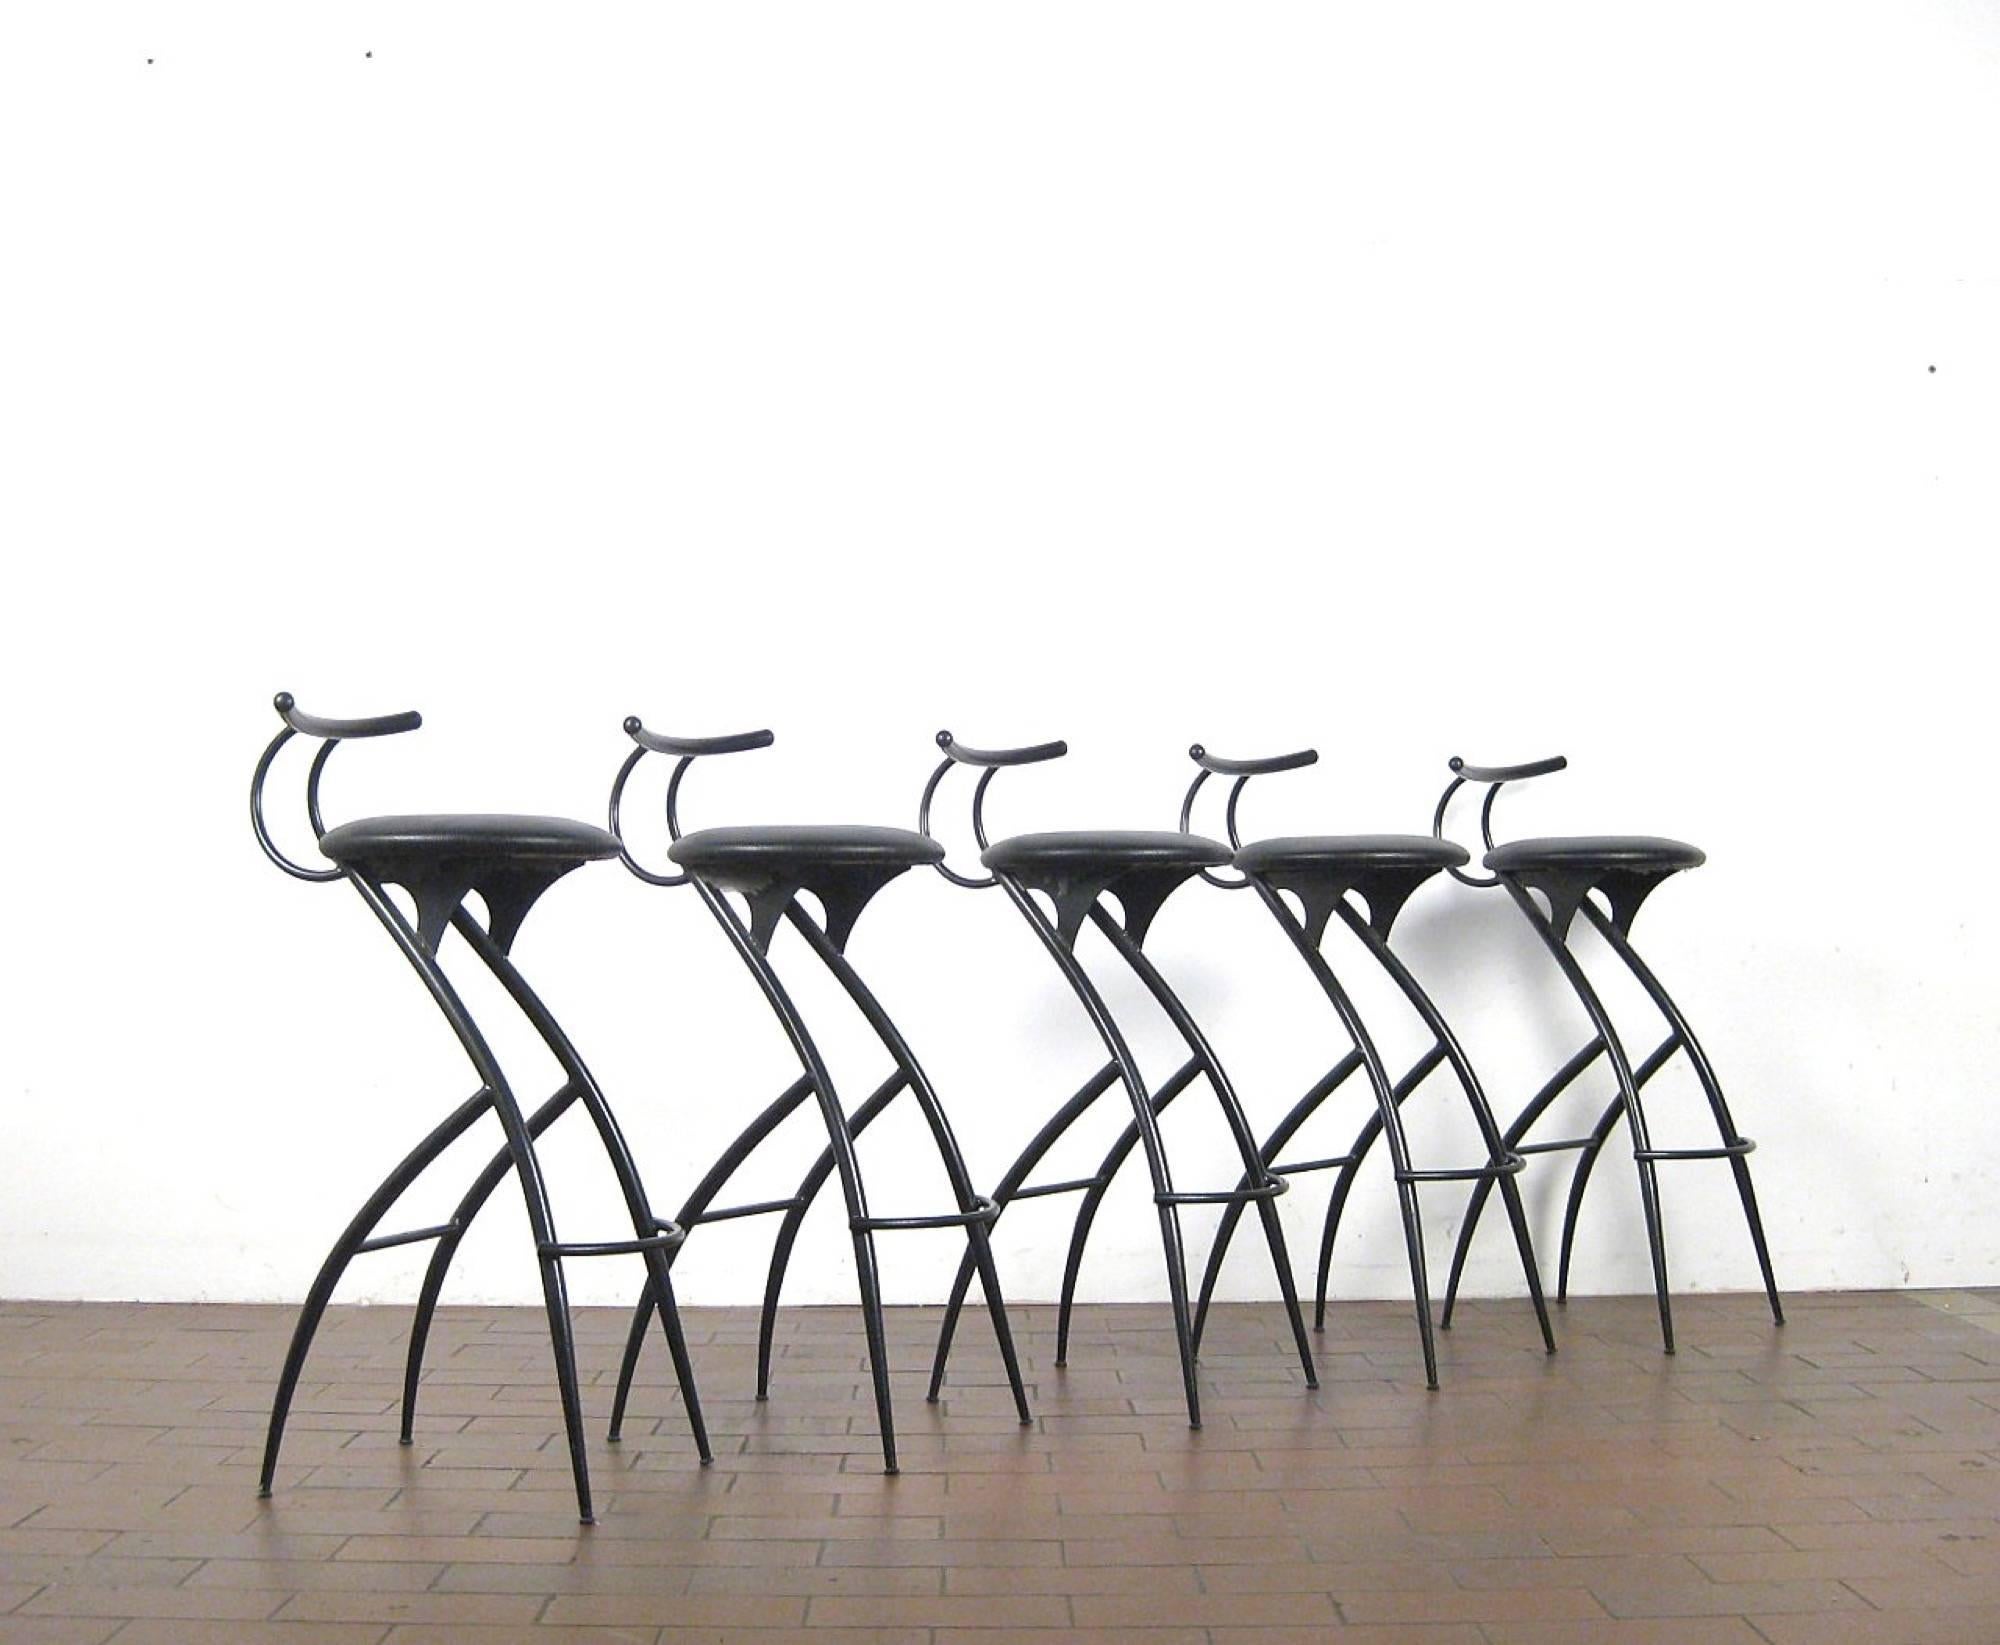 Set of five (5) 1980s Italian Postmodern barstools in black lacquered metal and seats in black faux leather.